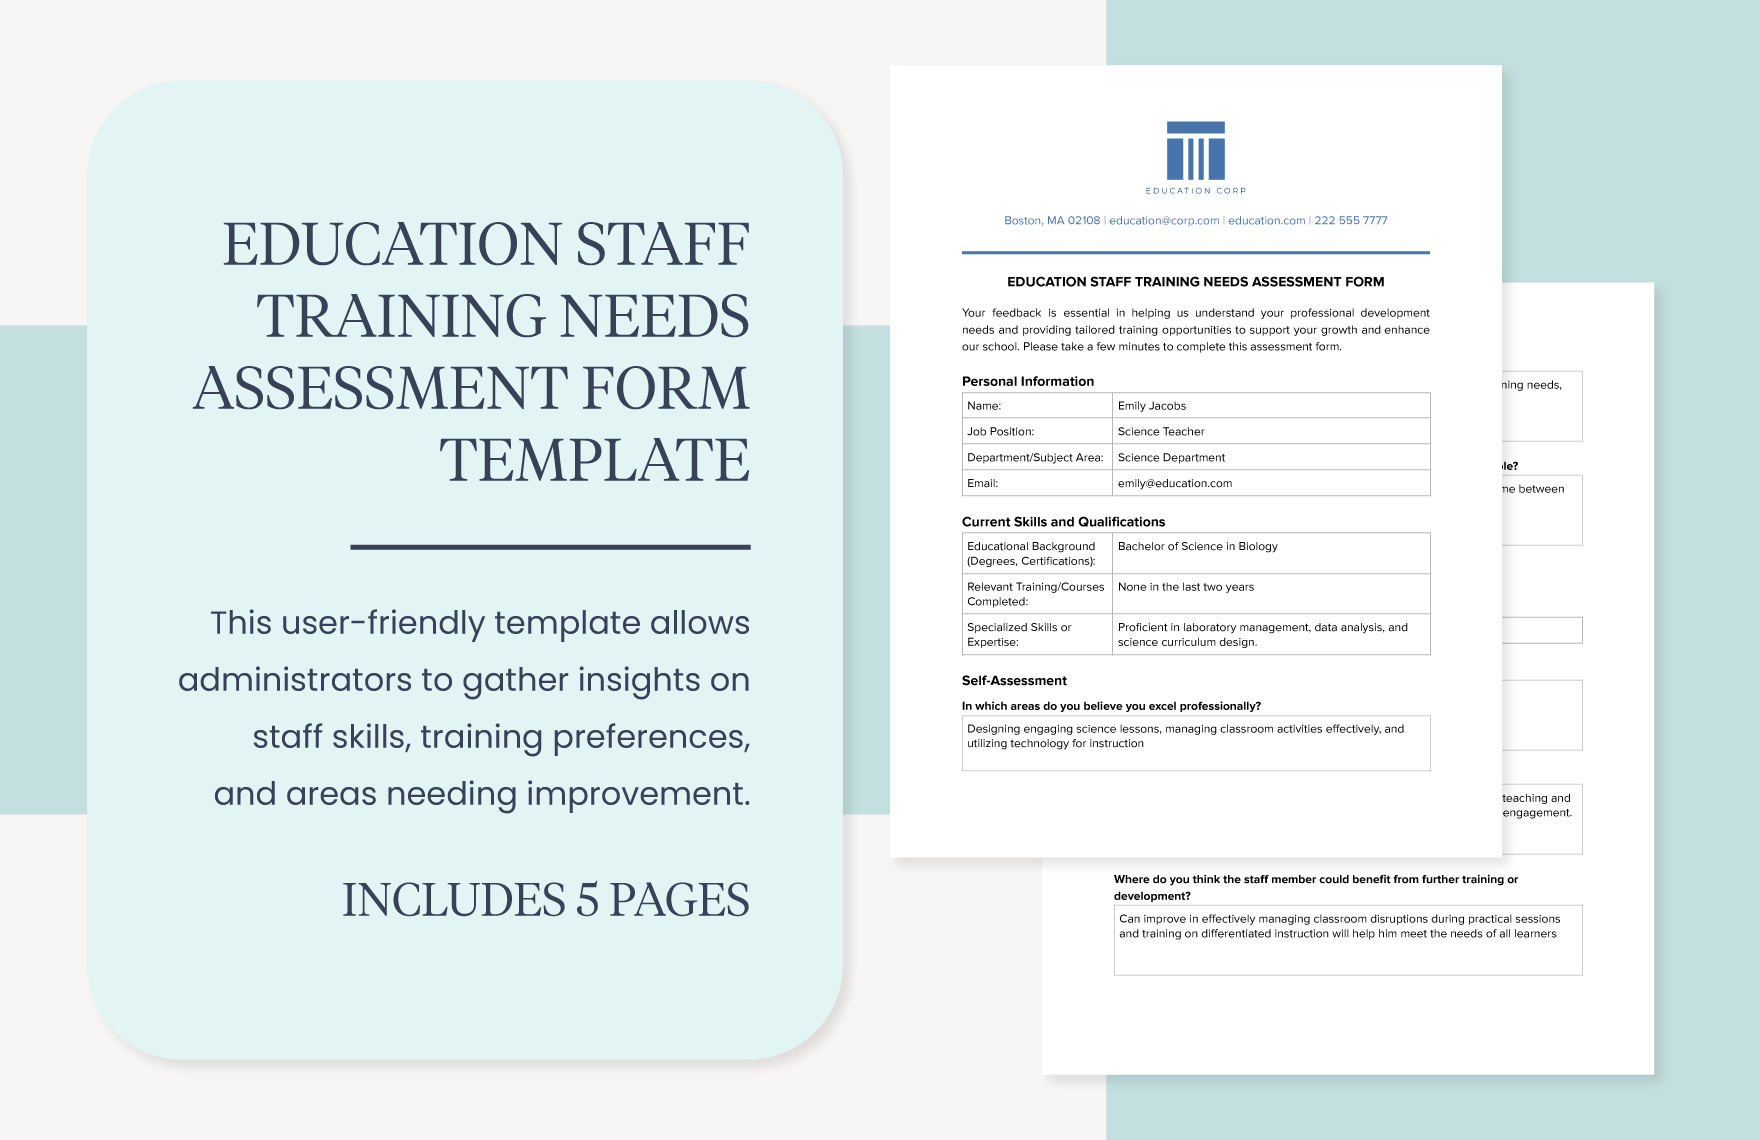 Education Staff Training Needs Assessment Form Template in Word, Google Docs, PDF